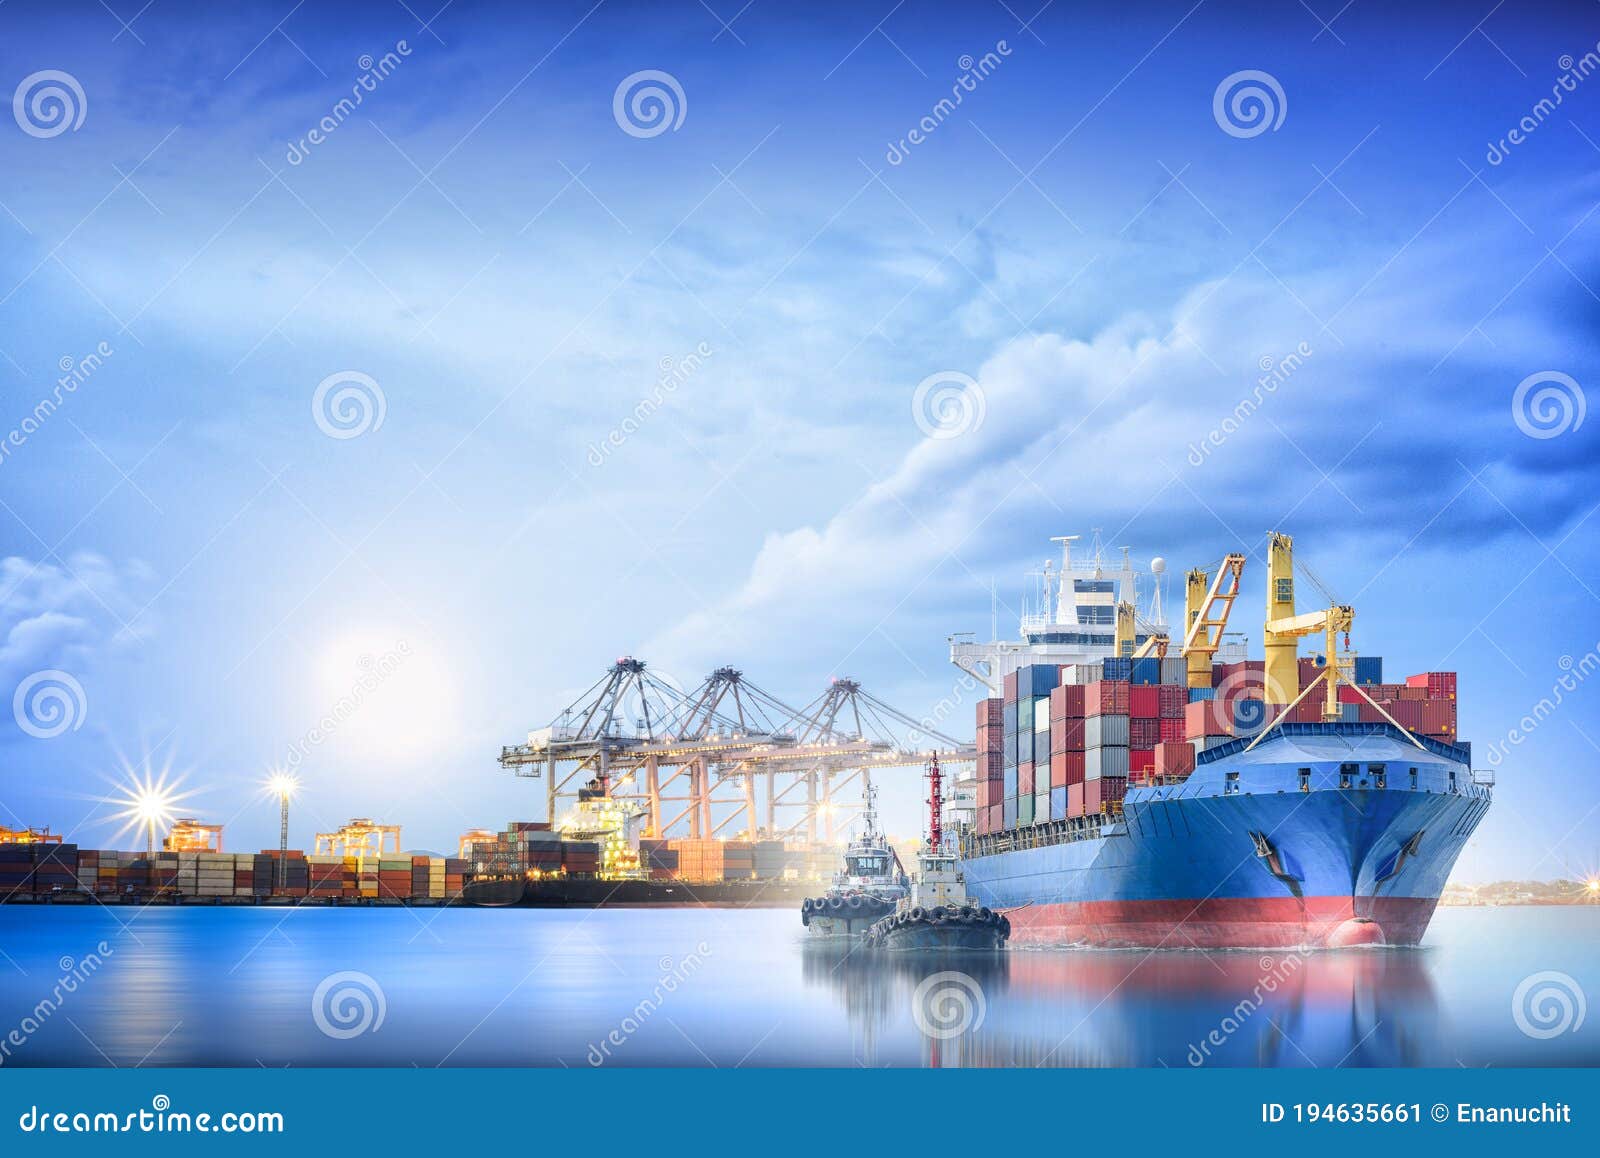 logistics and transportation of international container cargo ship with ports crane